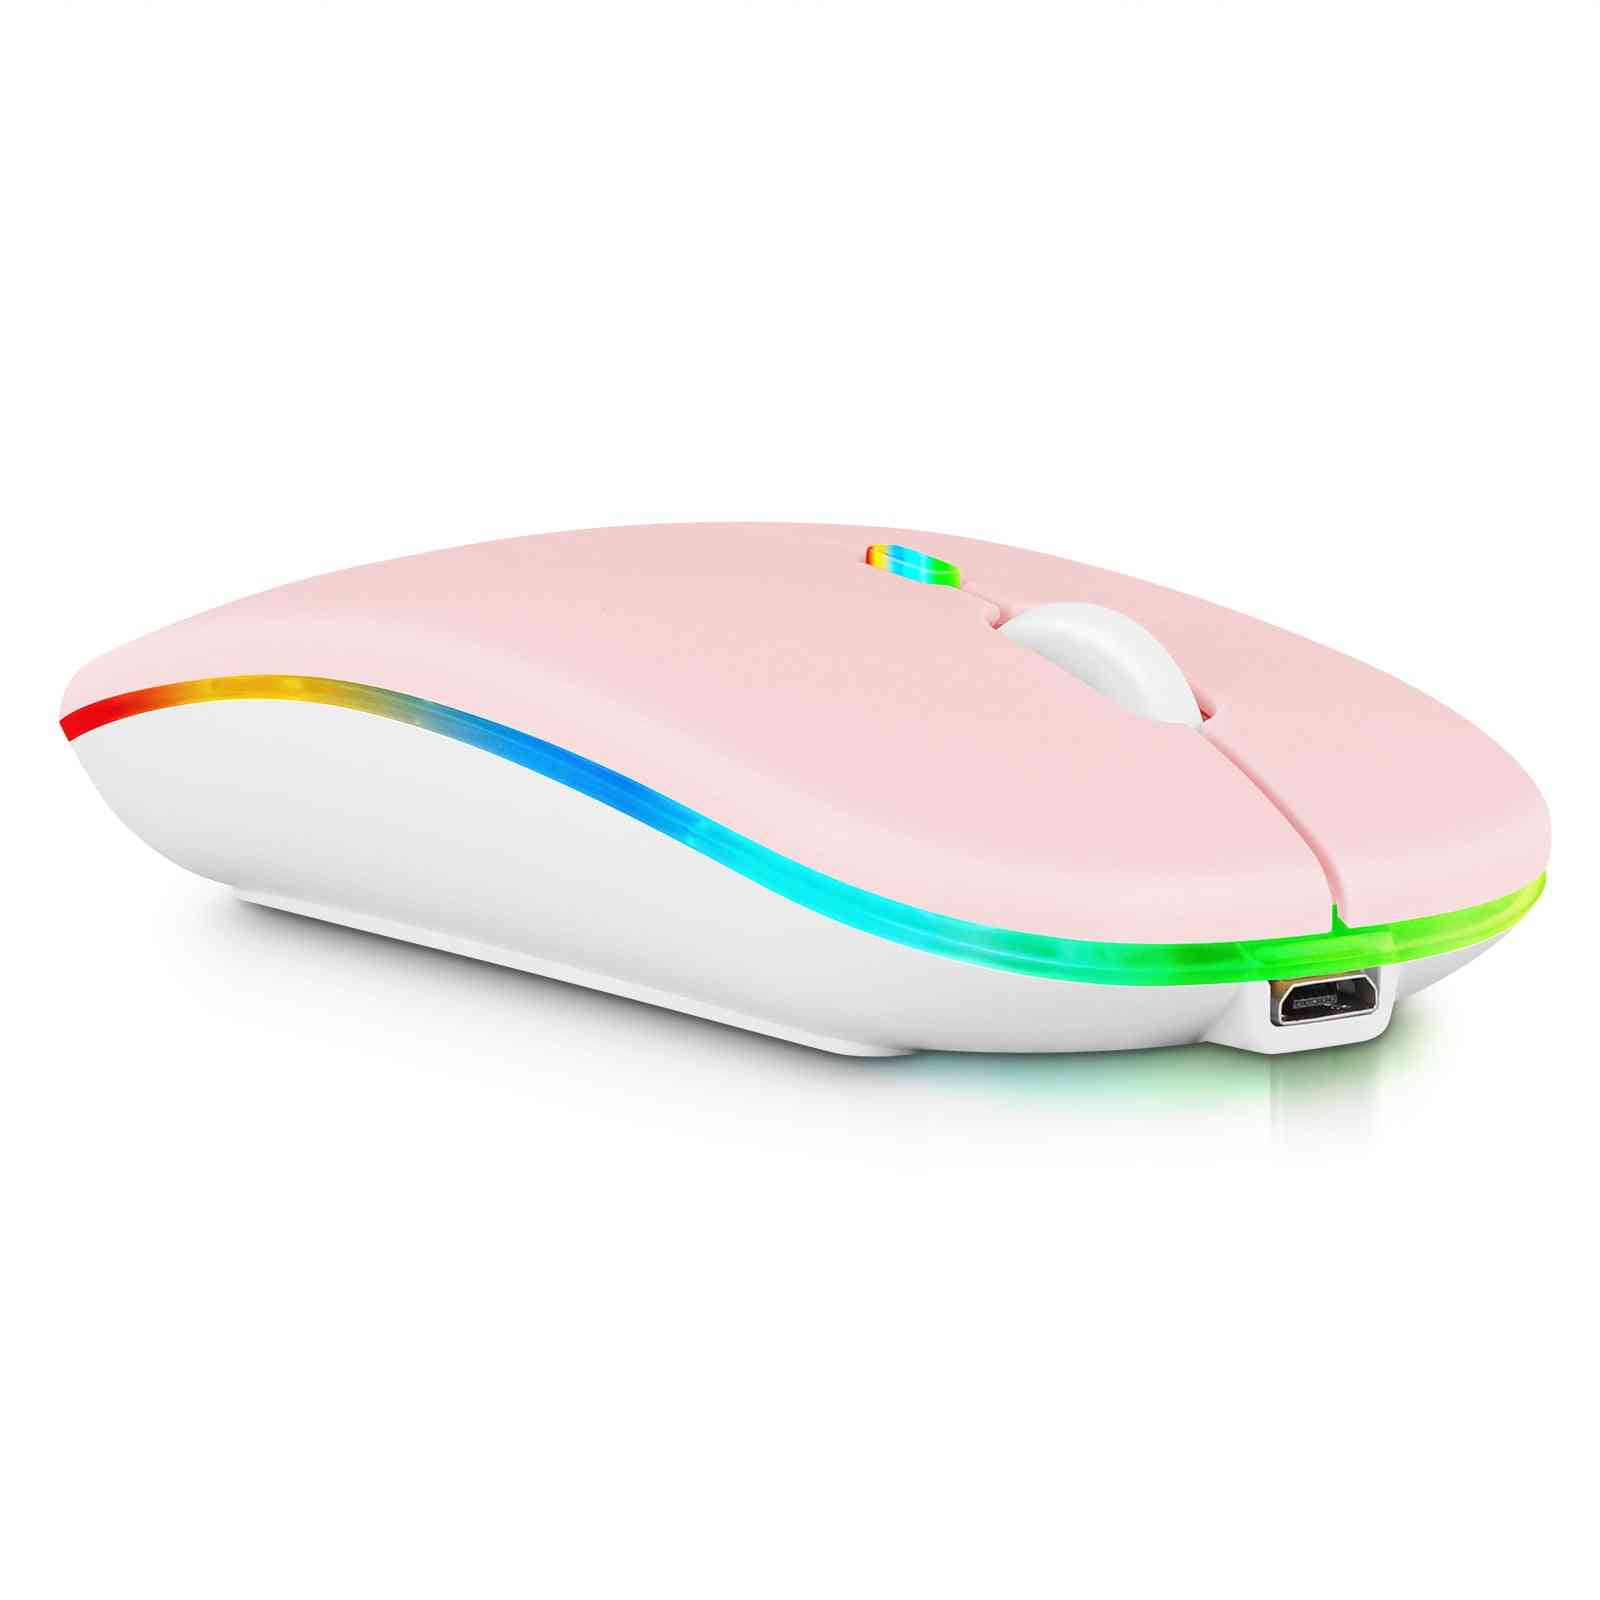 Graan Op de een of andere manier Kakadu 2.4GHz & Bluetooth Mouse, Rechargeable Wireless LED Mouse for Huawei nova  10z ALso Compatible with TV / Laptop / PC / Mac / iPad pro / Computer /  Tablet / Android - Banana Yellow - Walmart.com